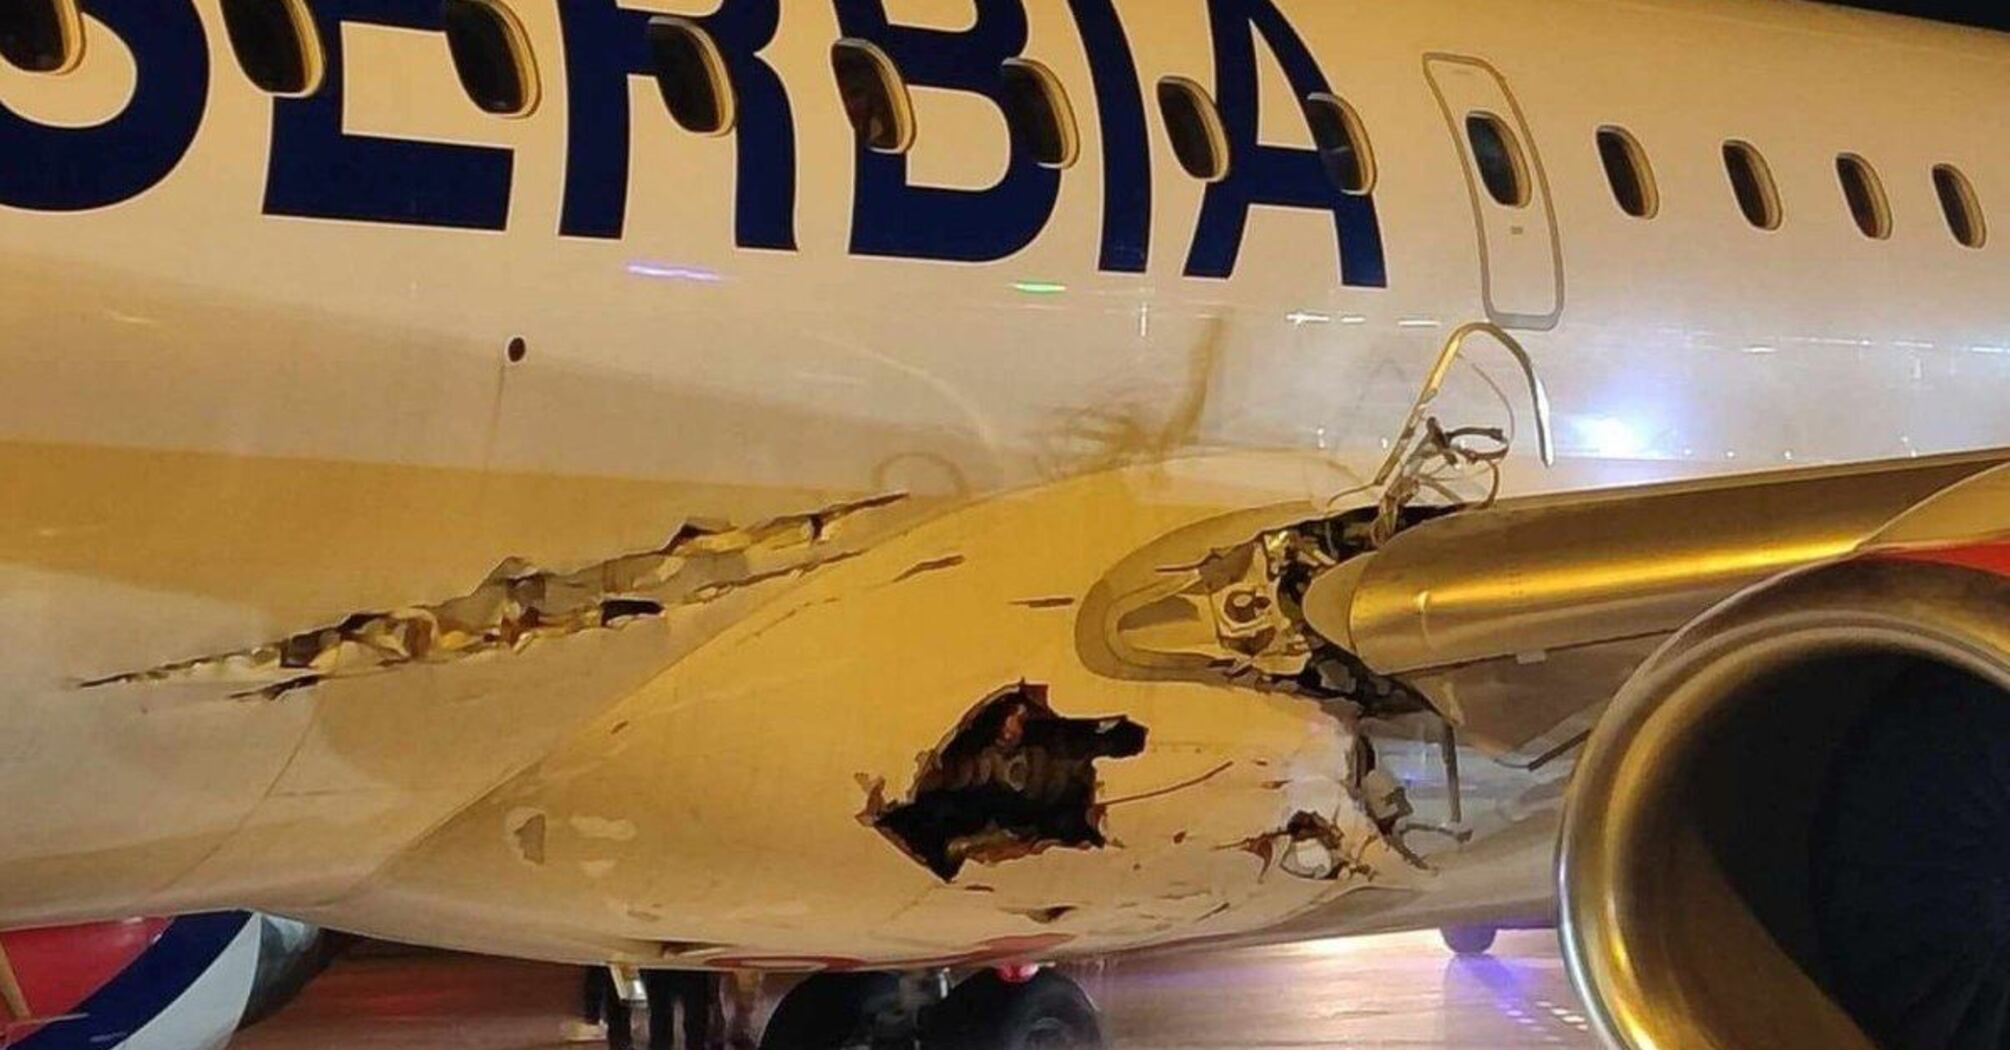 In Belgrade, the plane managed to take off with a hole in the fuselage